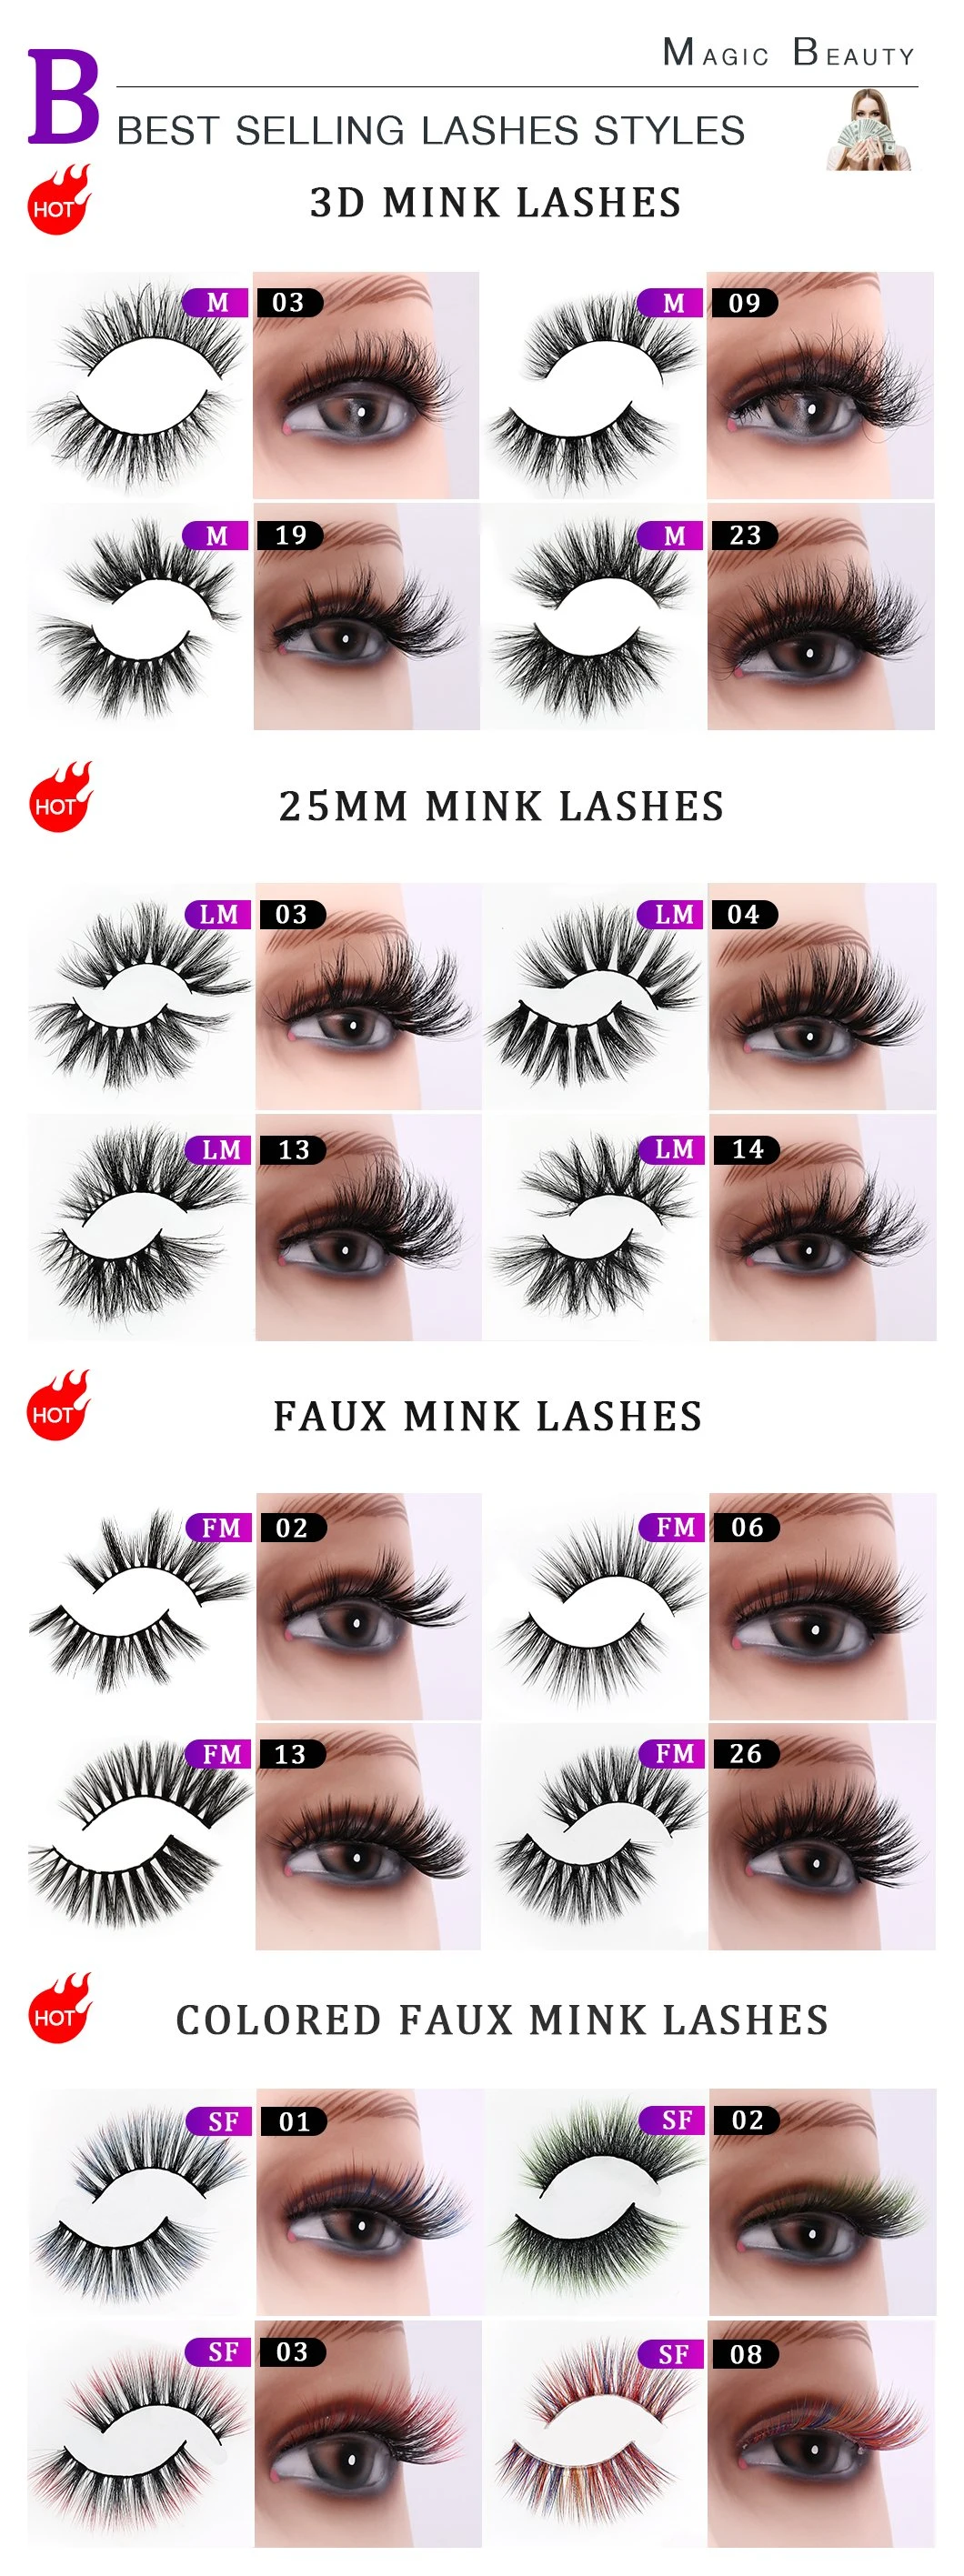 Wholesale False Eyelash Customize Private Label Packages 25mm 3D Faux Mink Eyelashes for Cosmetics